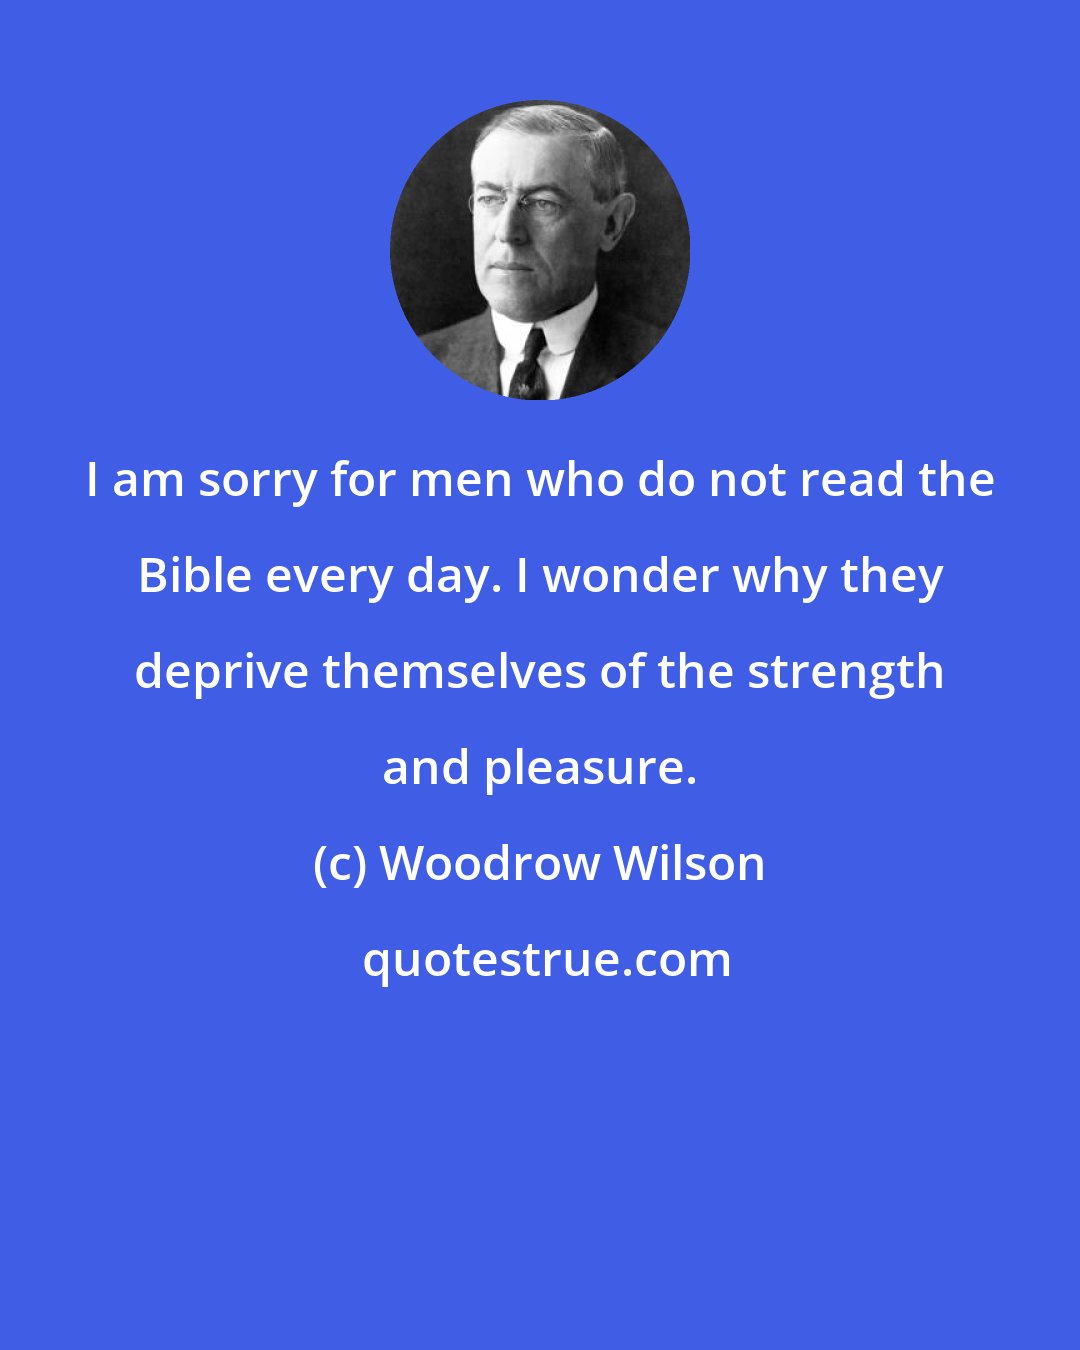 Woodrow Wilson: I am sorry for men who do not read the Bible every day. I wonder why they deprive themselves of the strength and pleasure.